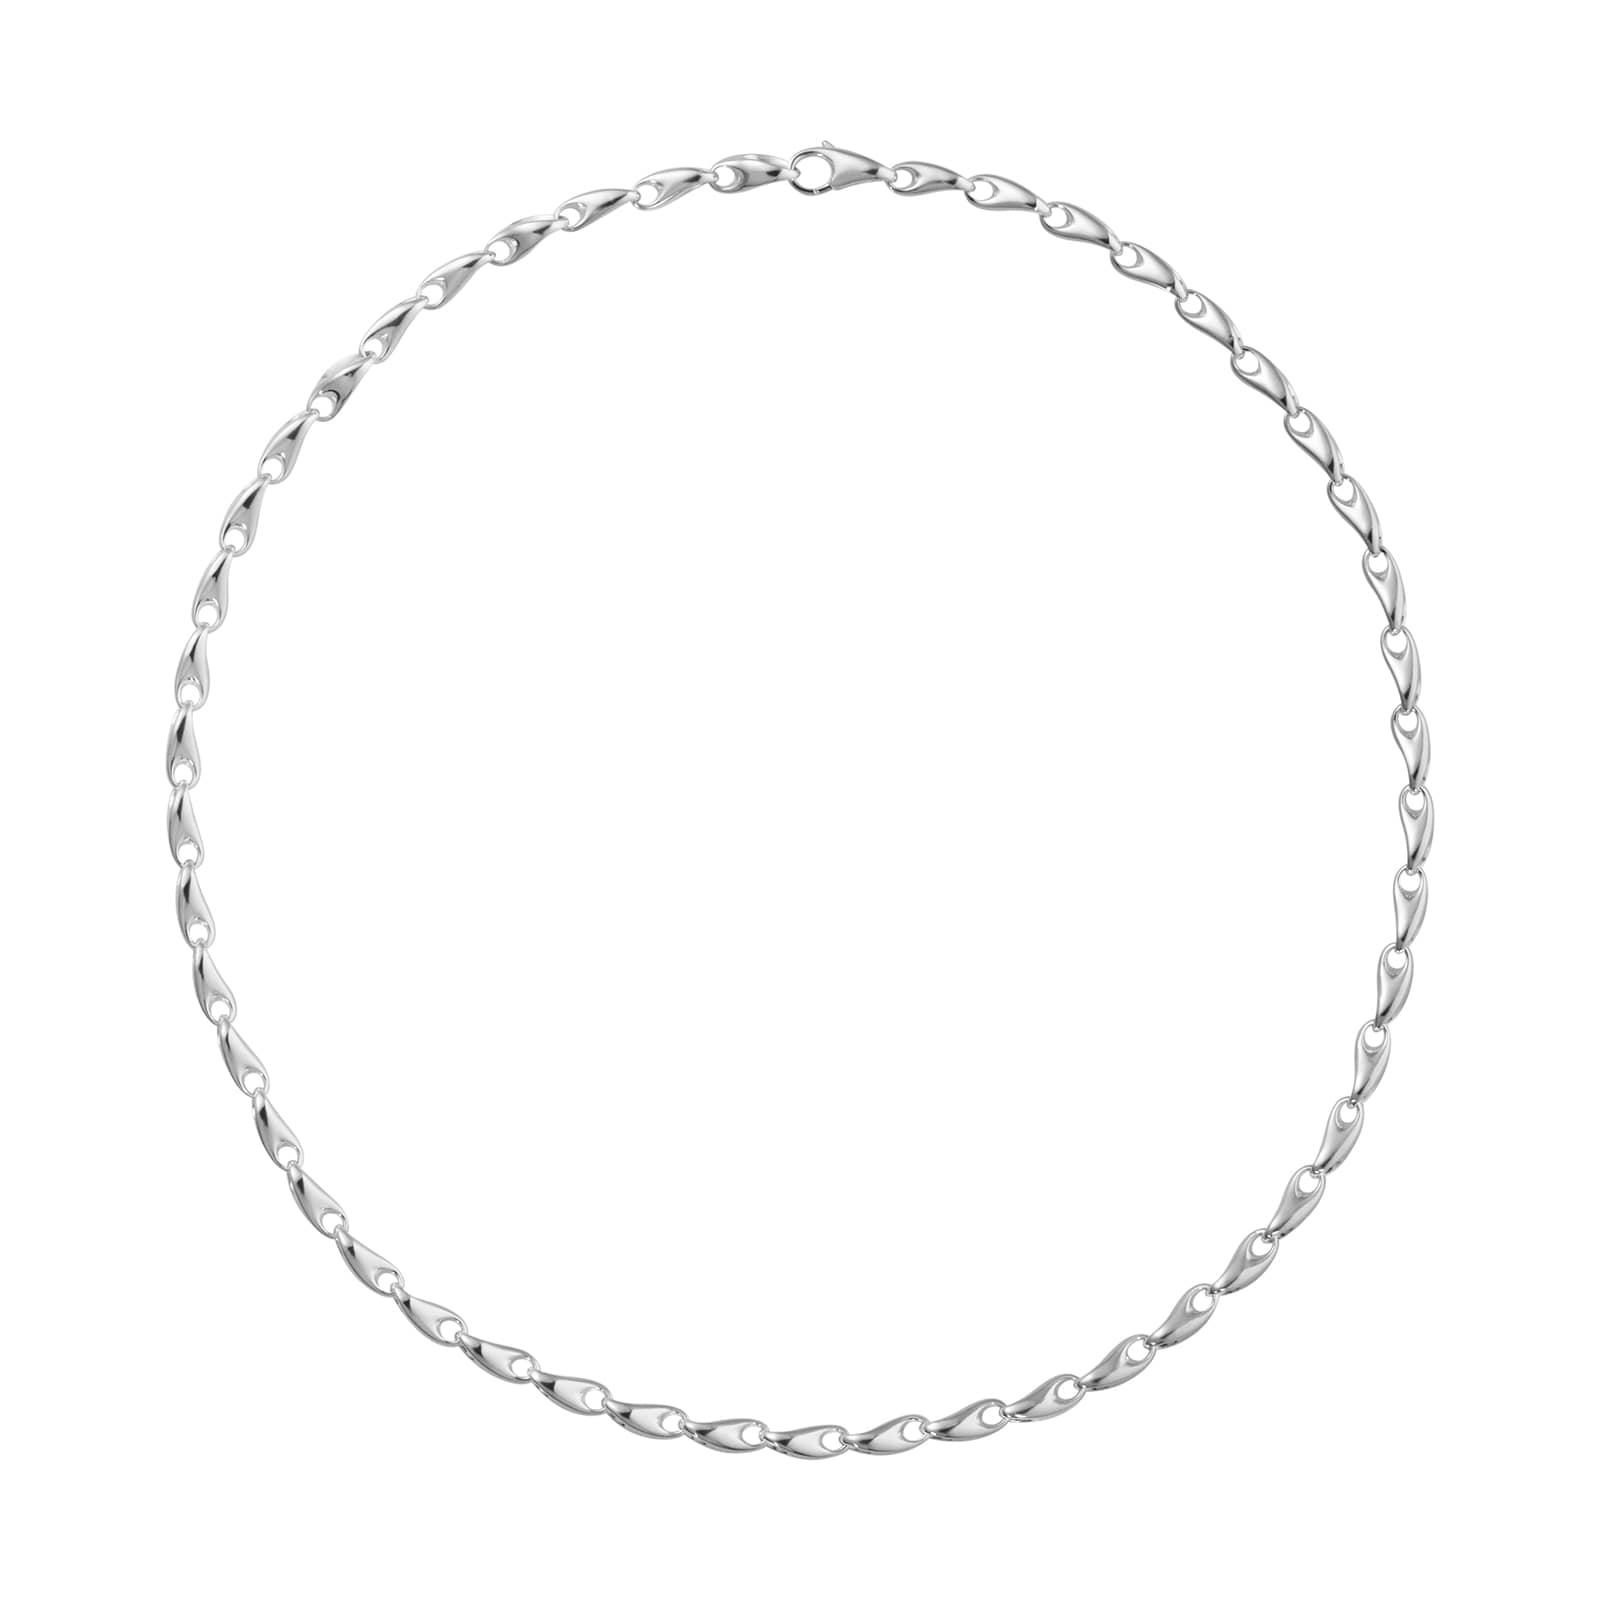 Sterling Silver Reflect 55cm Chain Necklace